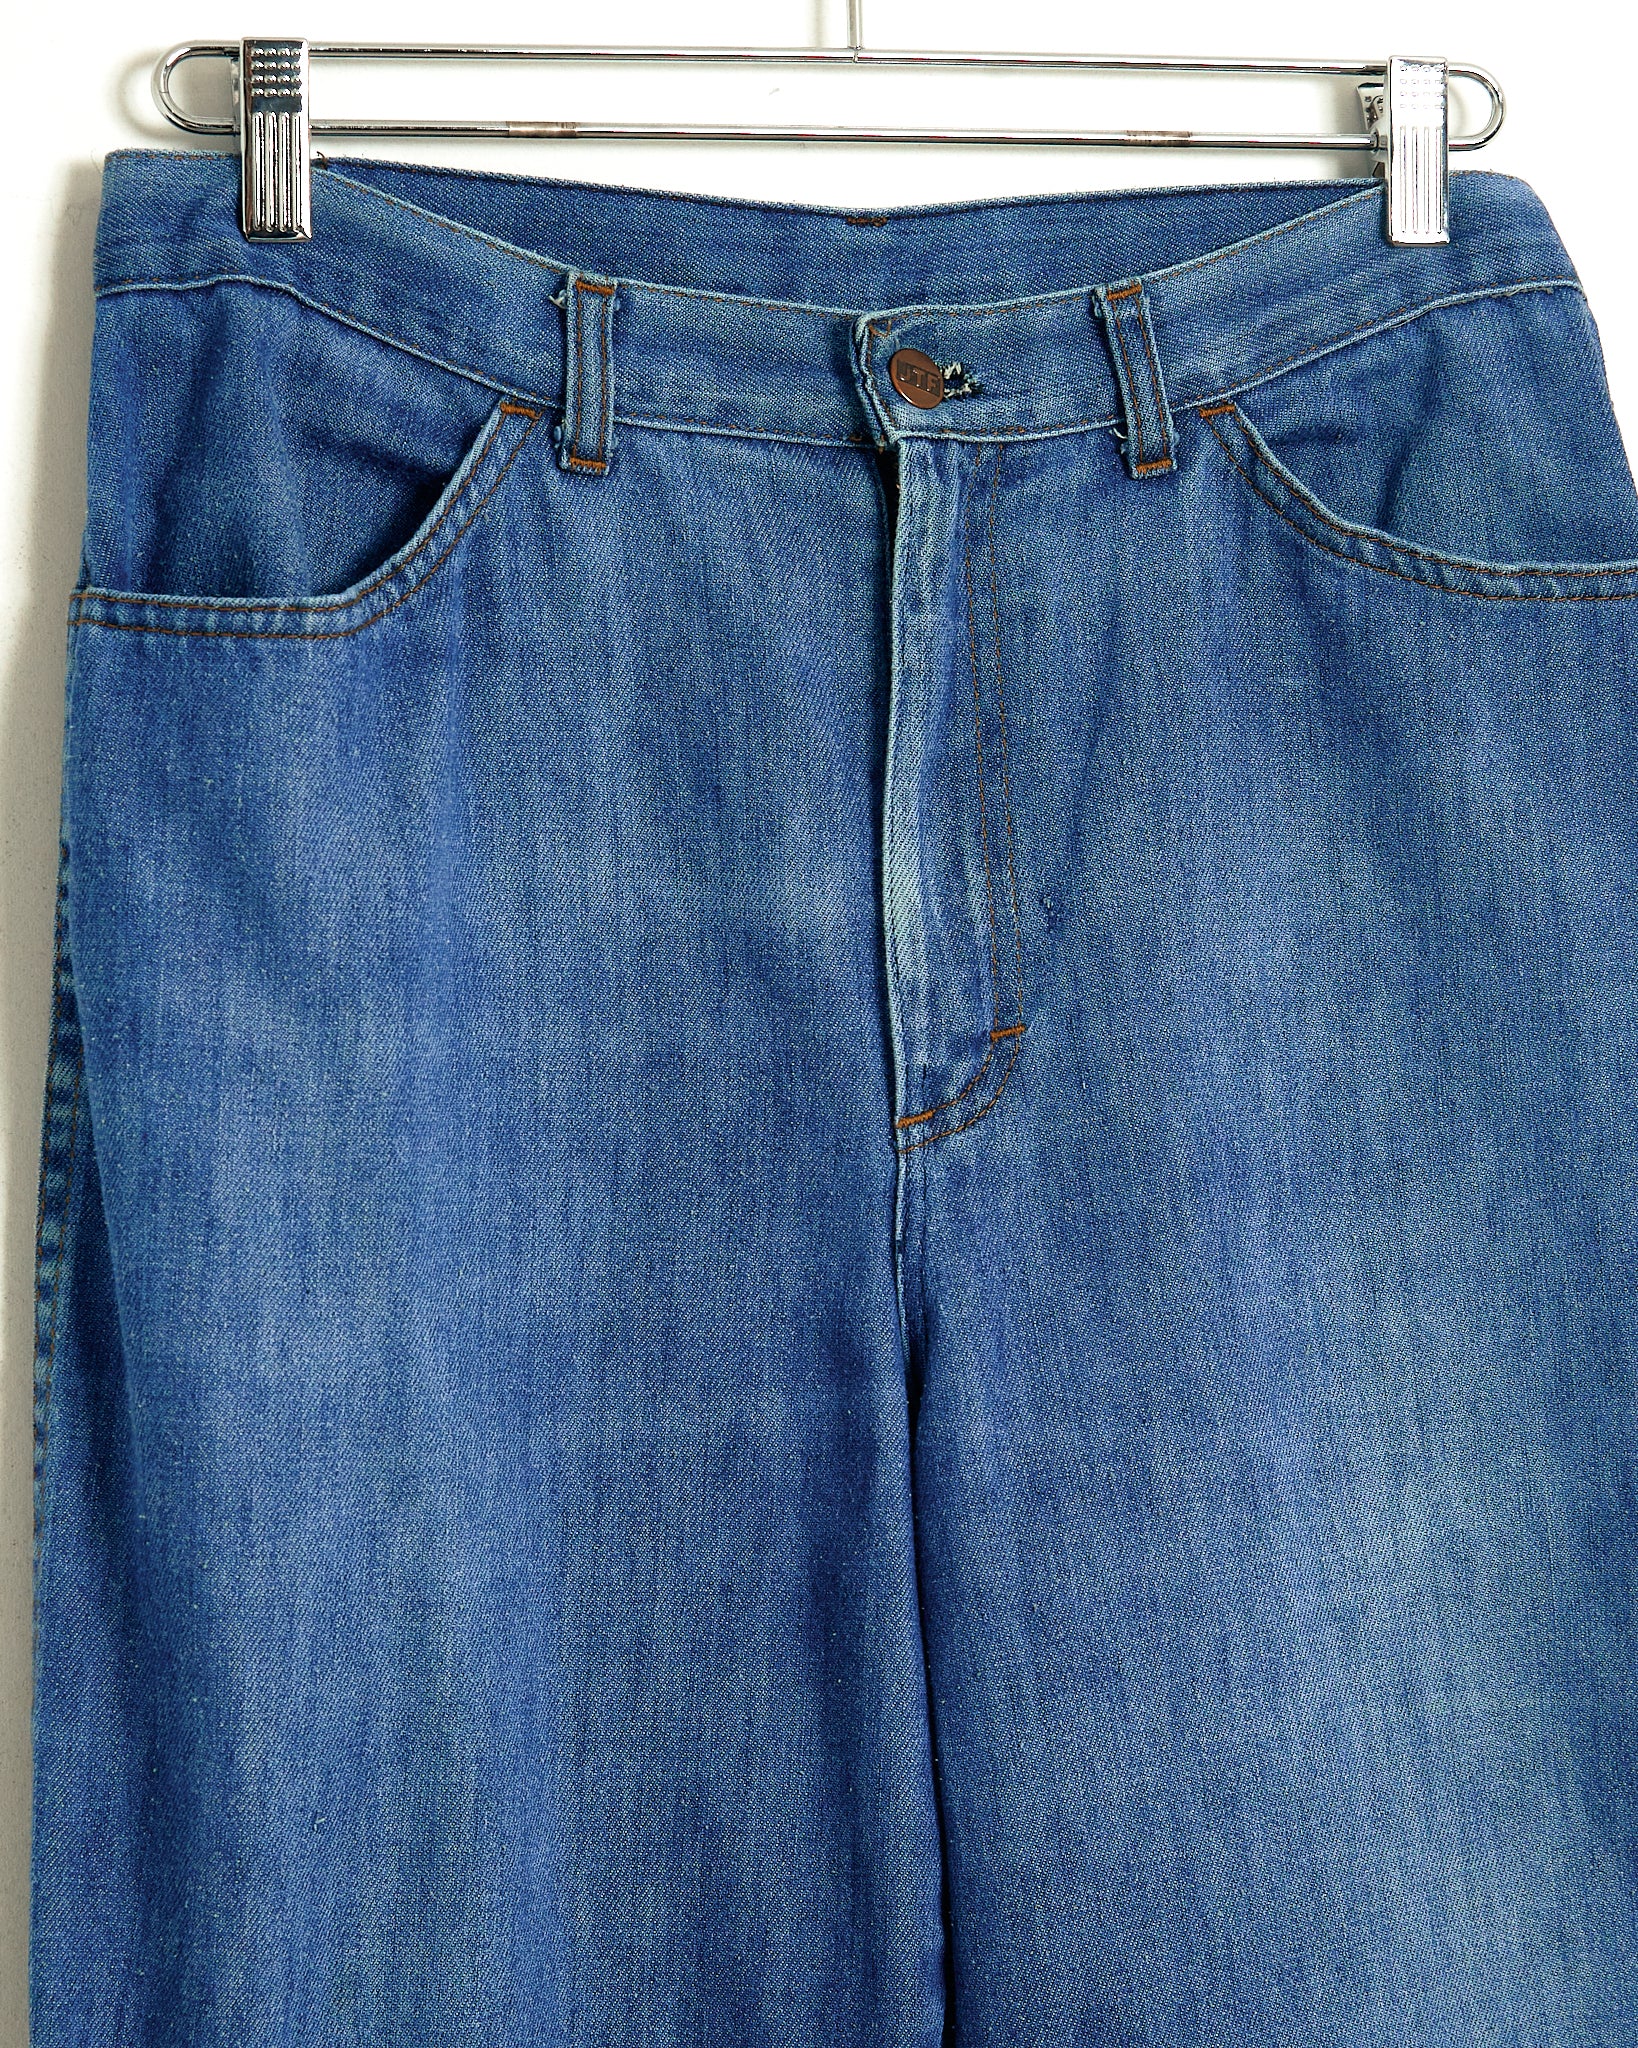 1970s Sears JTF Straight Leg Jeans - 29x31 – Coffee and Clothing